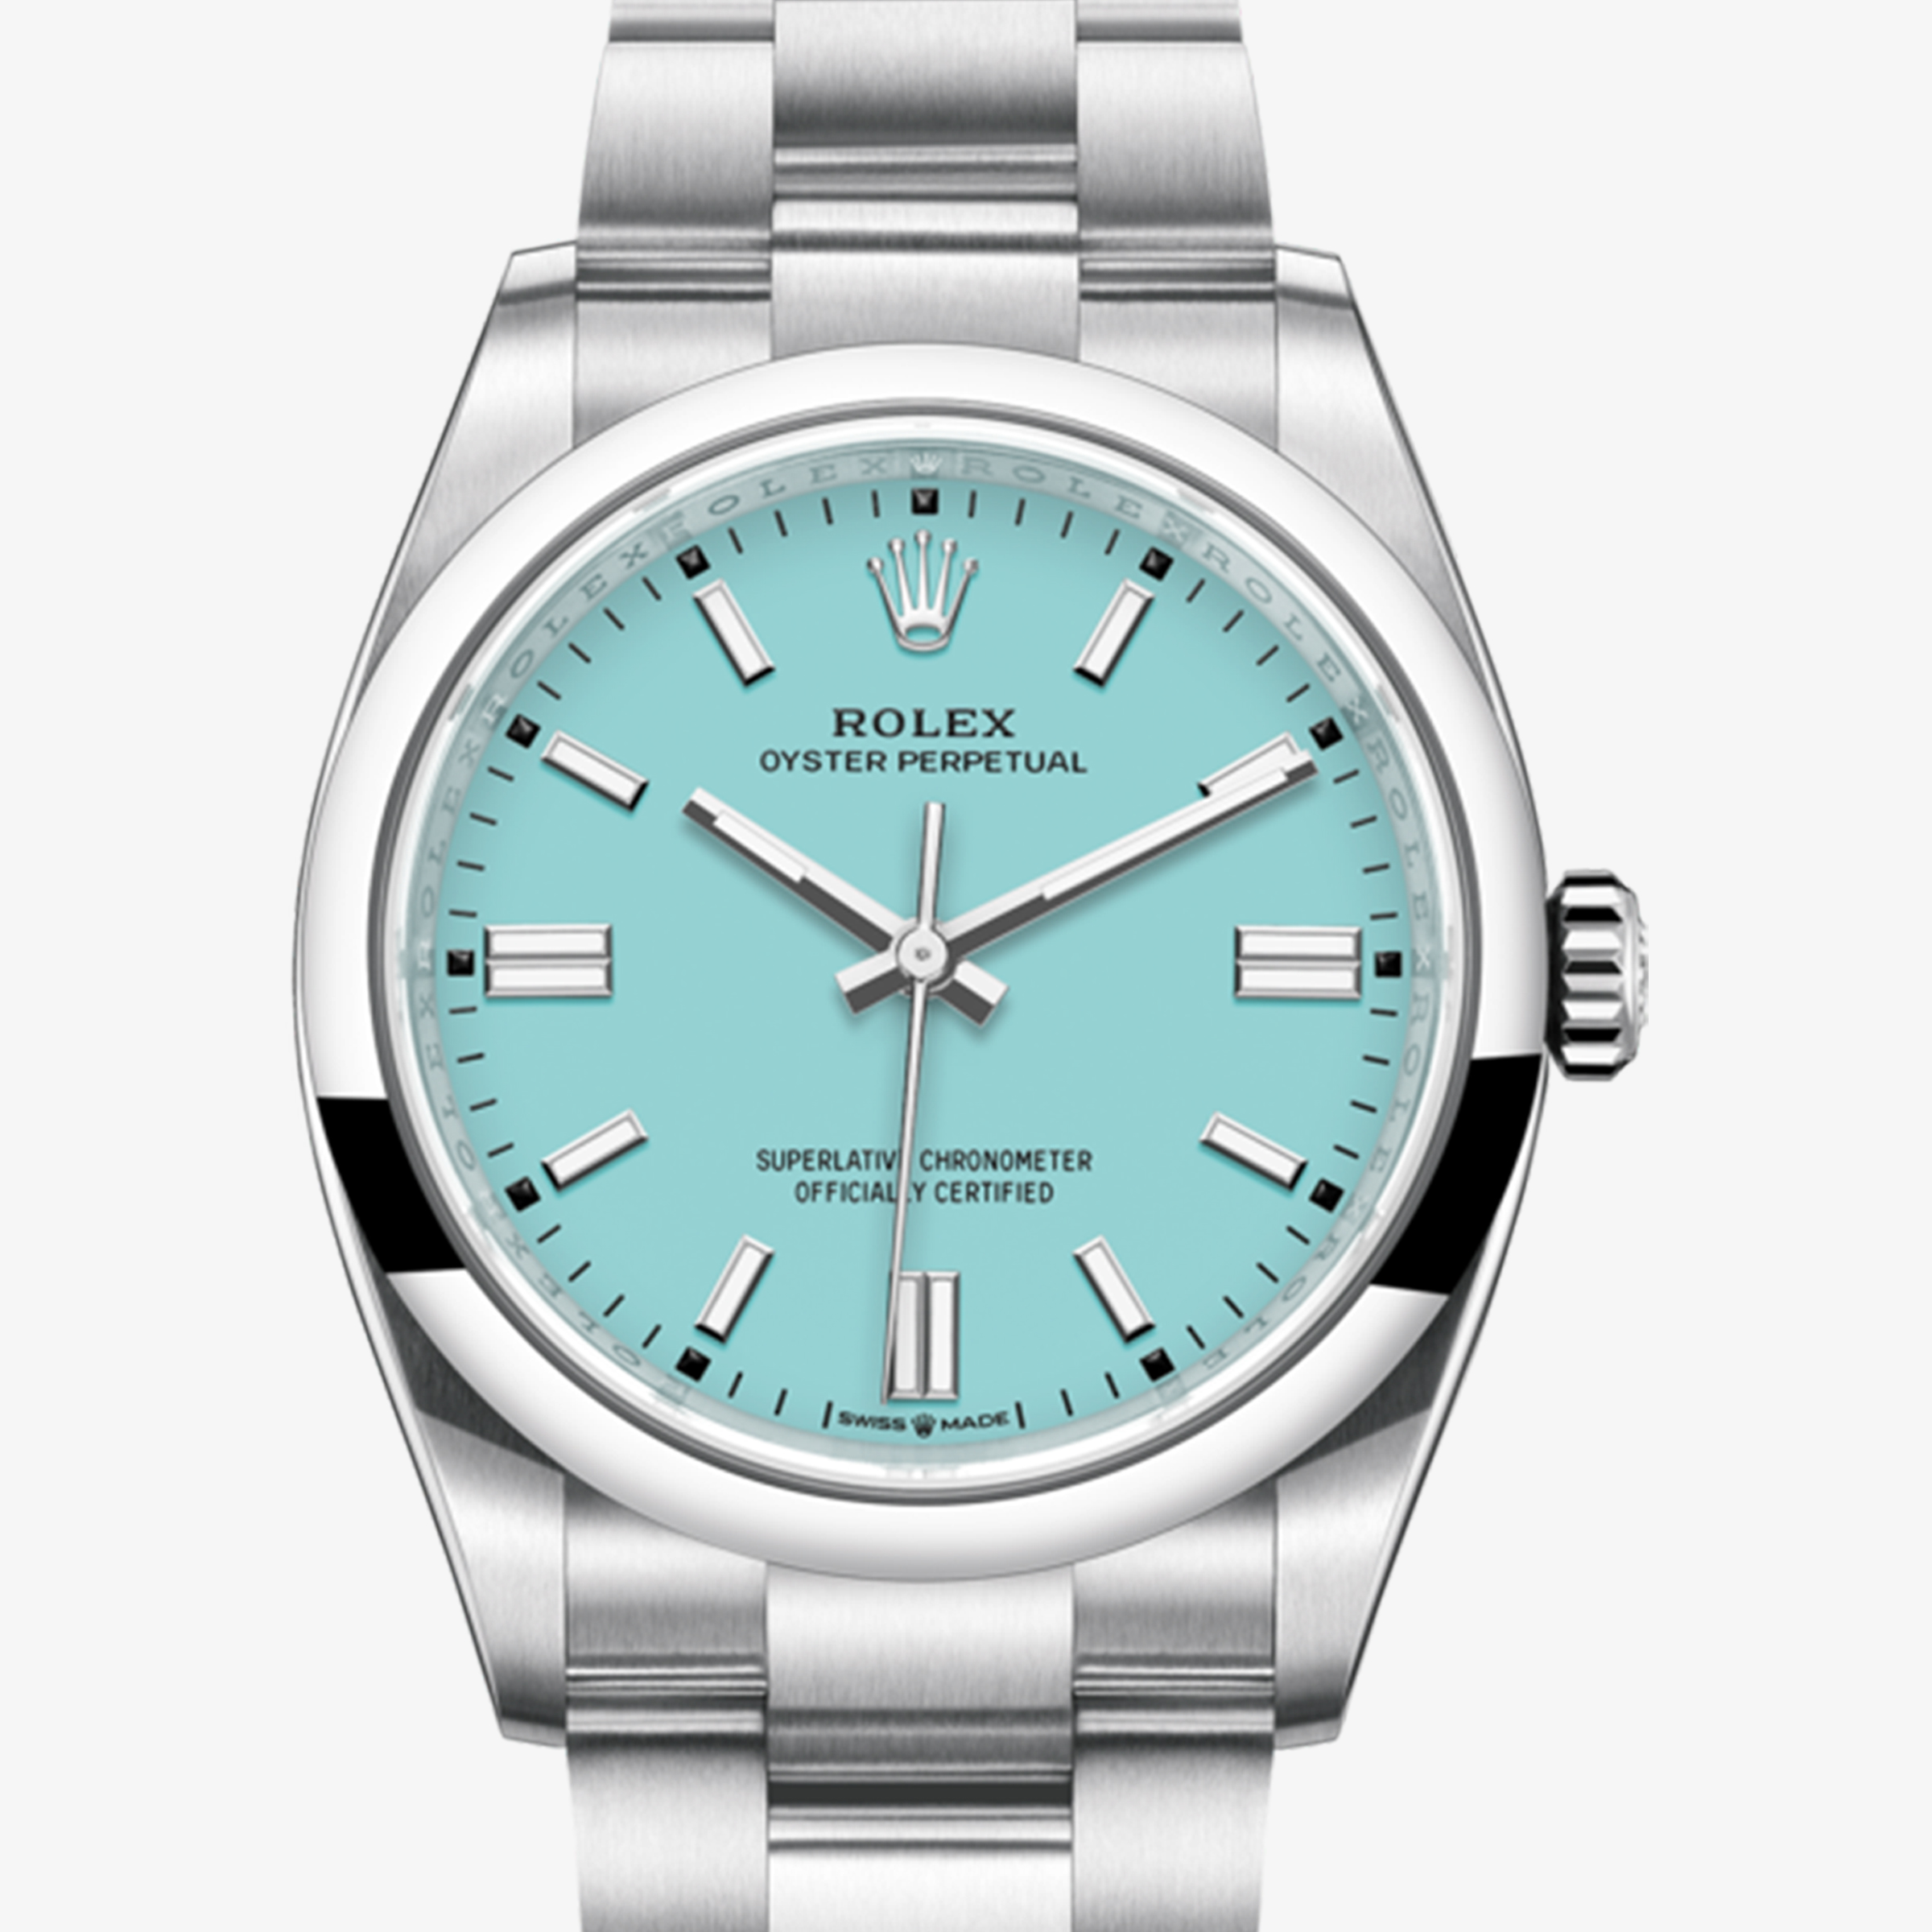 Rolex Oyster Perpetual Oyster, 36 mm, Oystersteel M126000-0006 | Oyster  Perpetual | Rolex Watches | Goldsmiths